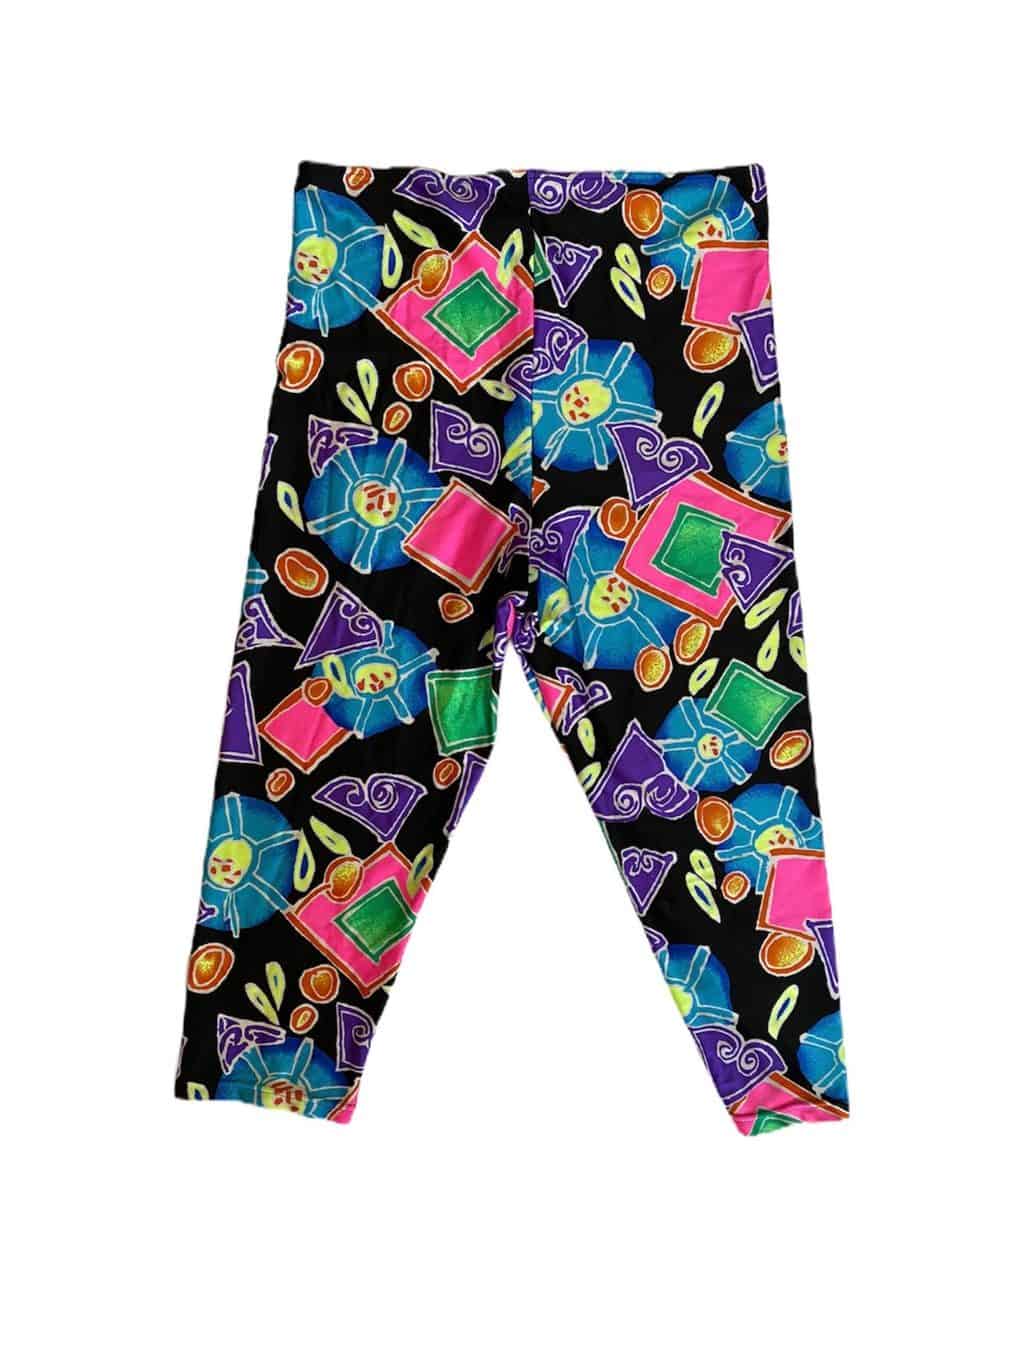 80s Bright Coloured Vintage Leggings by Sunflair - Small - St Cyr Vintage